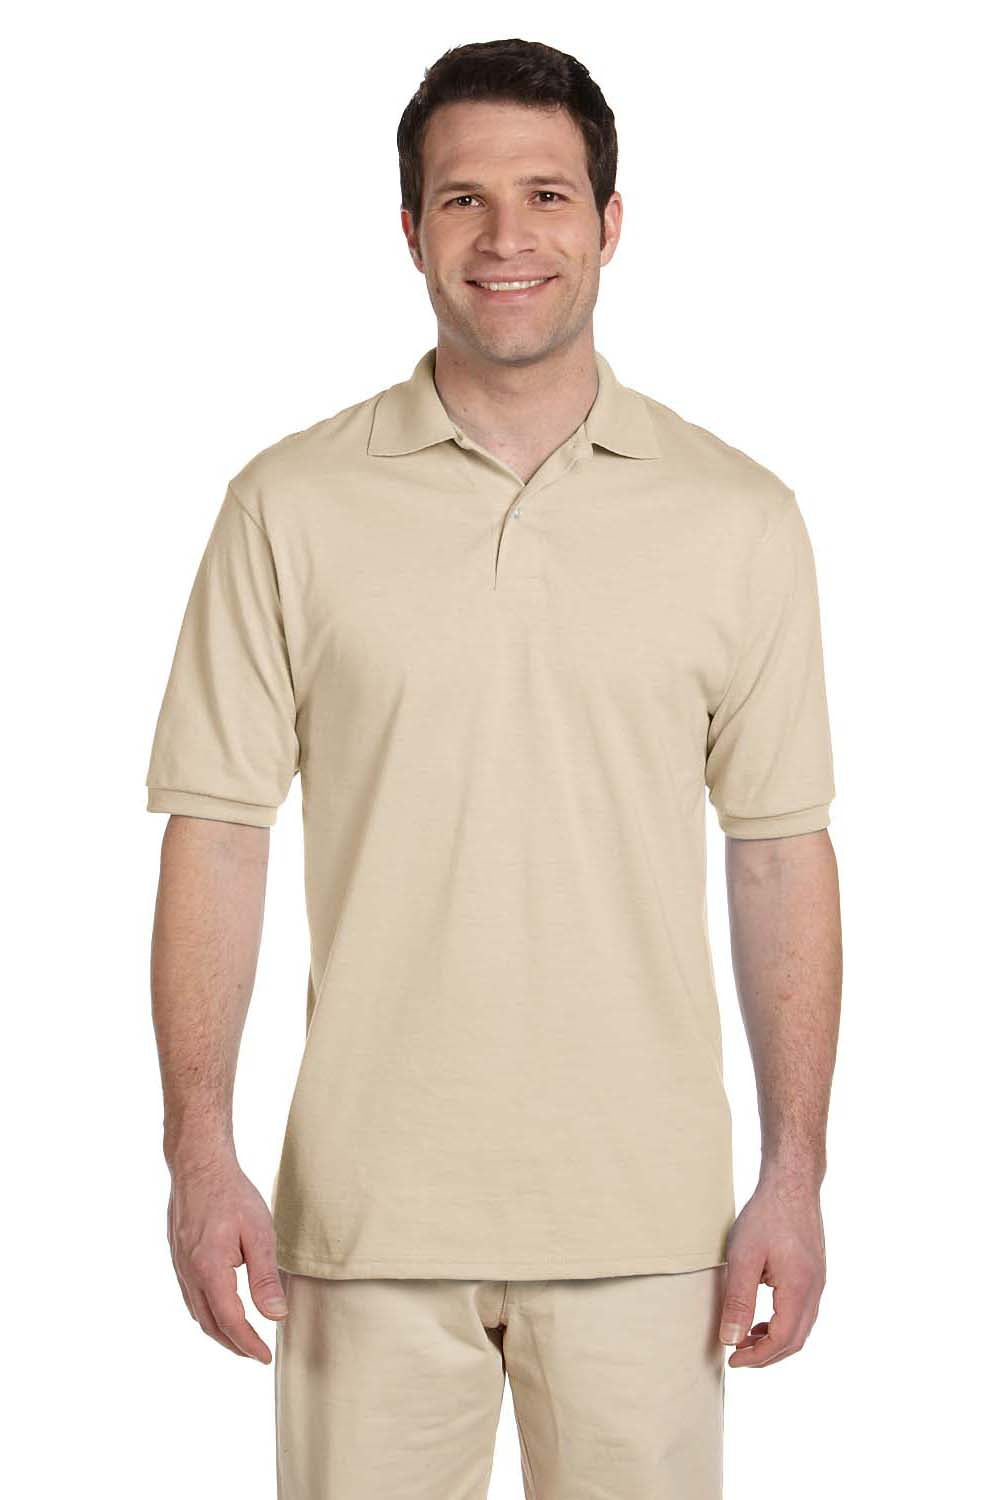 Jerzees 437 Mens SpotShield Stain Resistant Short Sleeve Polo Shirt Sandstone Brown Front